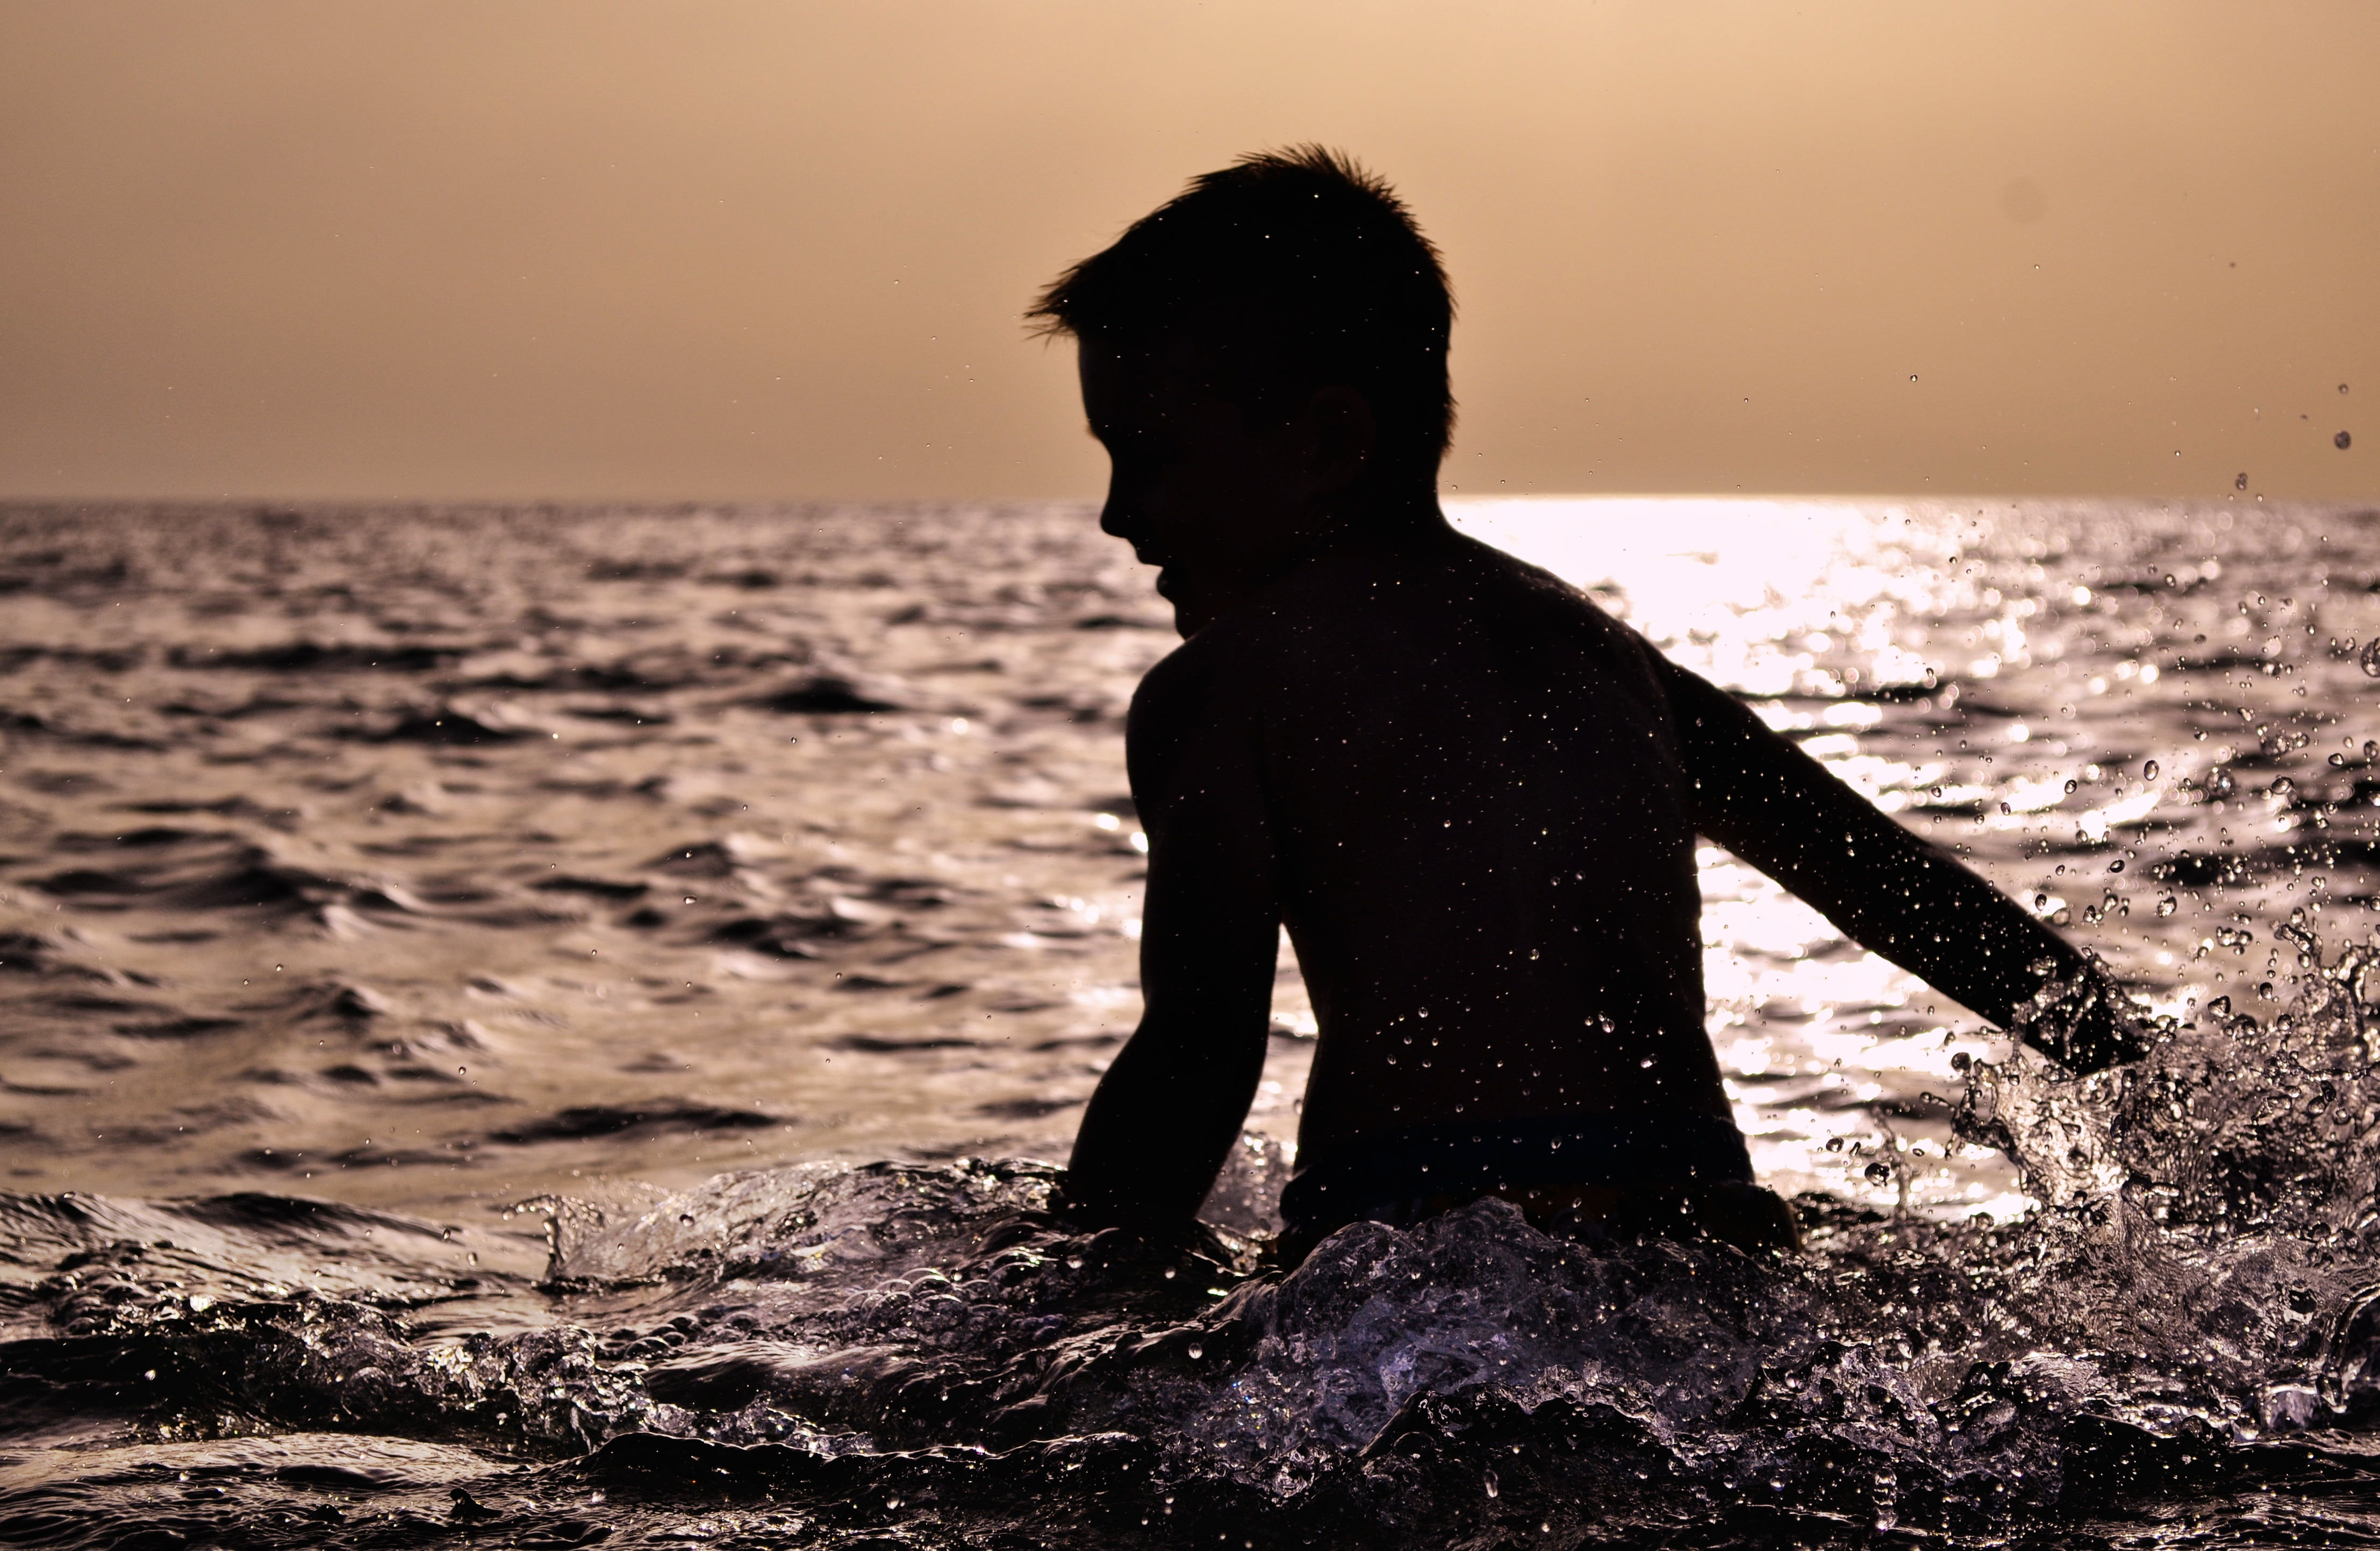 boy playing in the sea during dusk